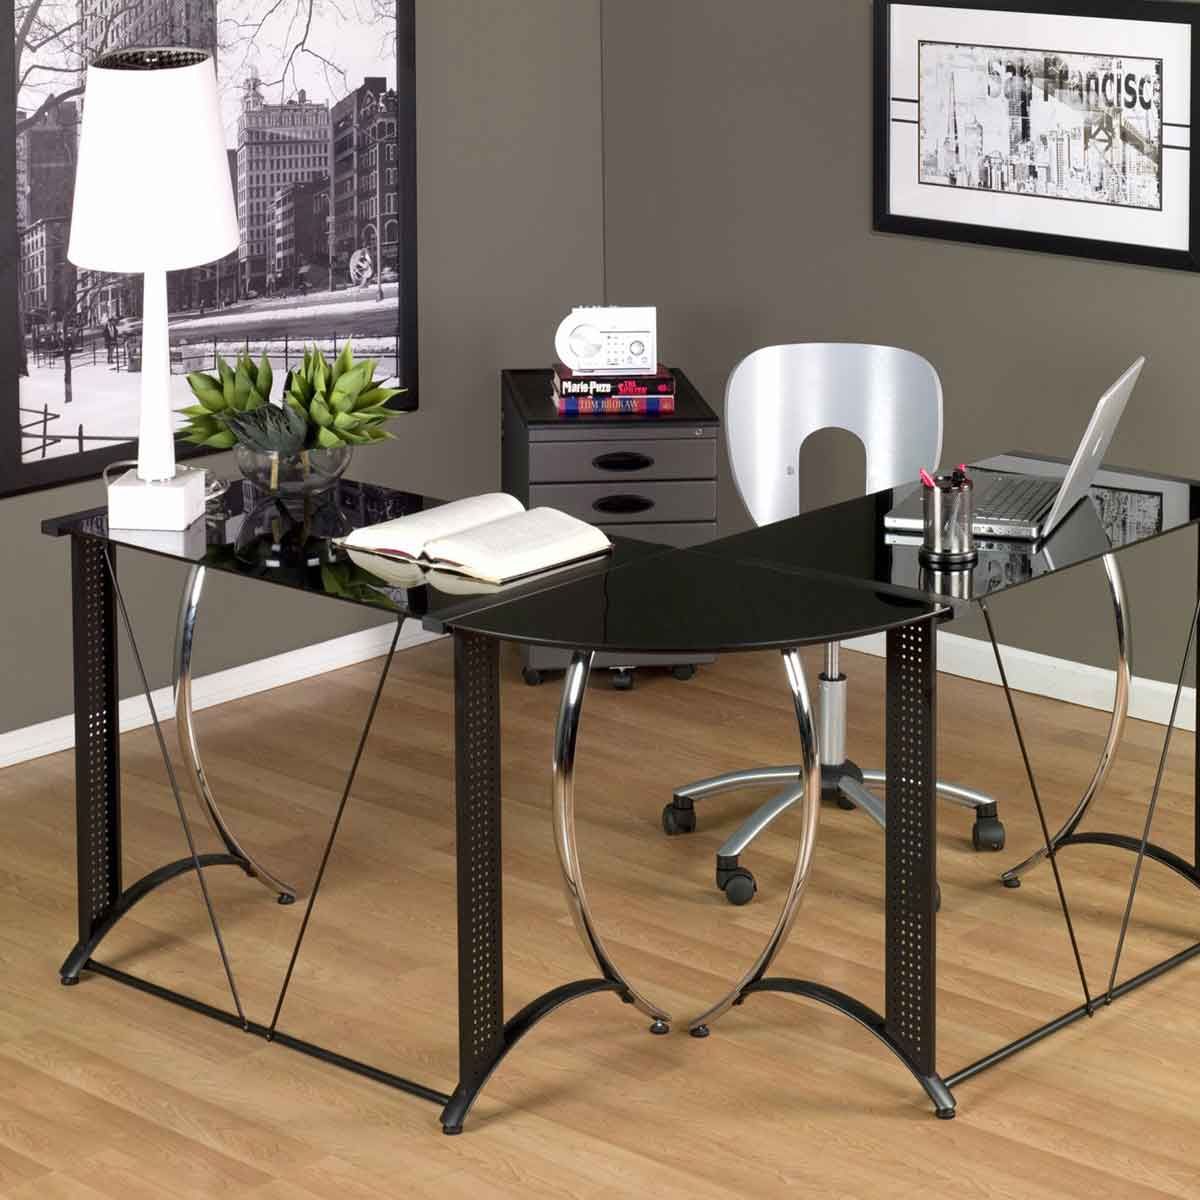 9 Black Office Desk Designs & How To Choose The Best One | Pouted With White And Black Office Desks (View 1 of 15)